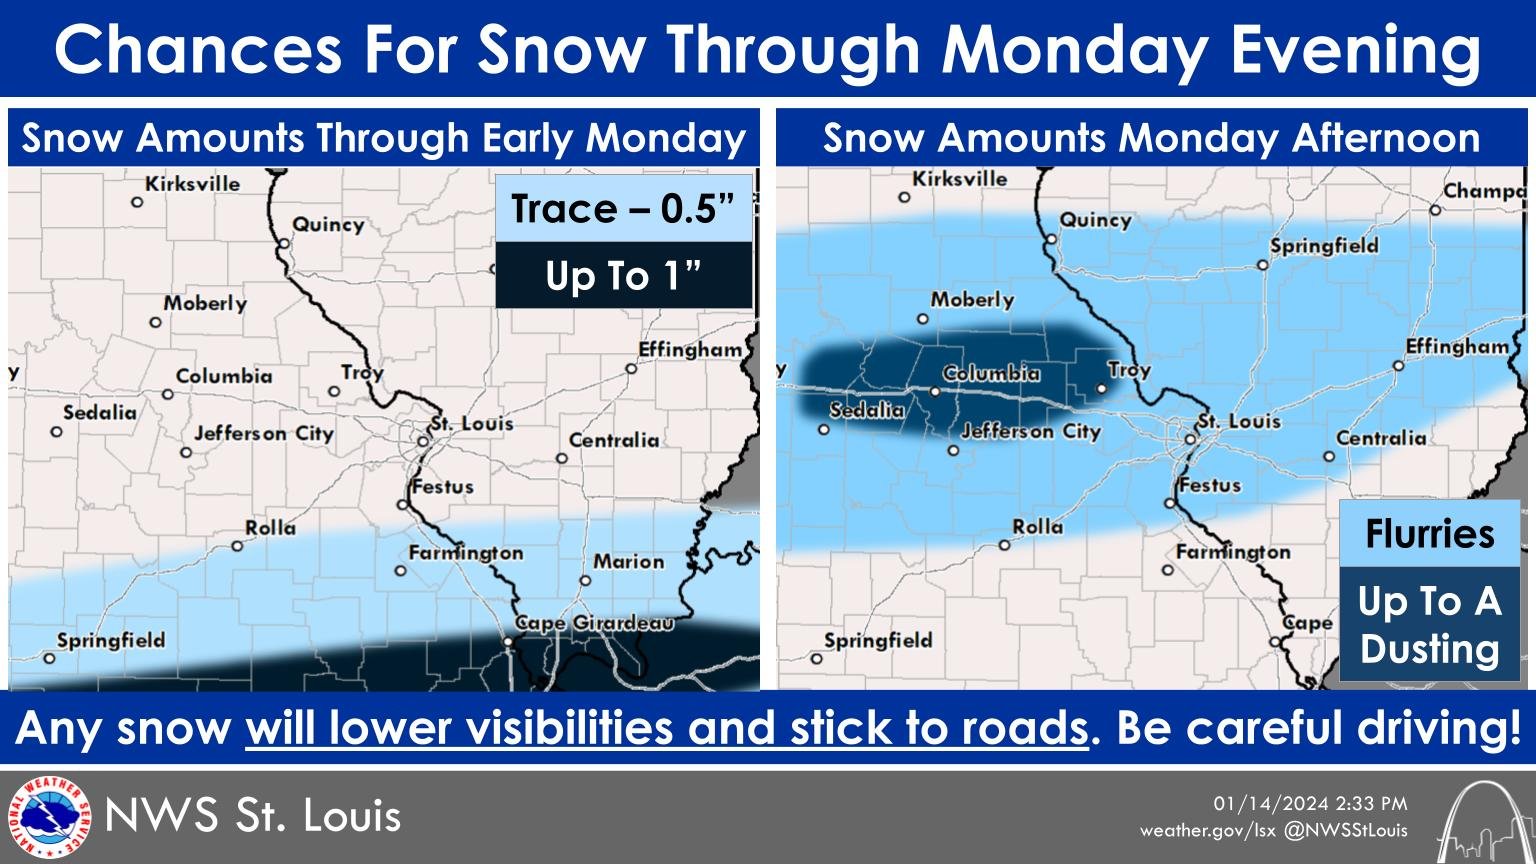 Columbia’s wind chill warning continues; light snow expected Monday near I-70 corridor